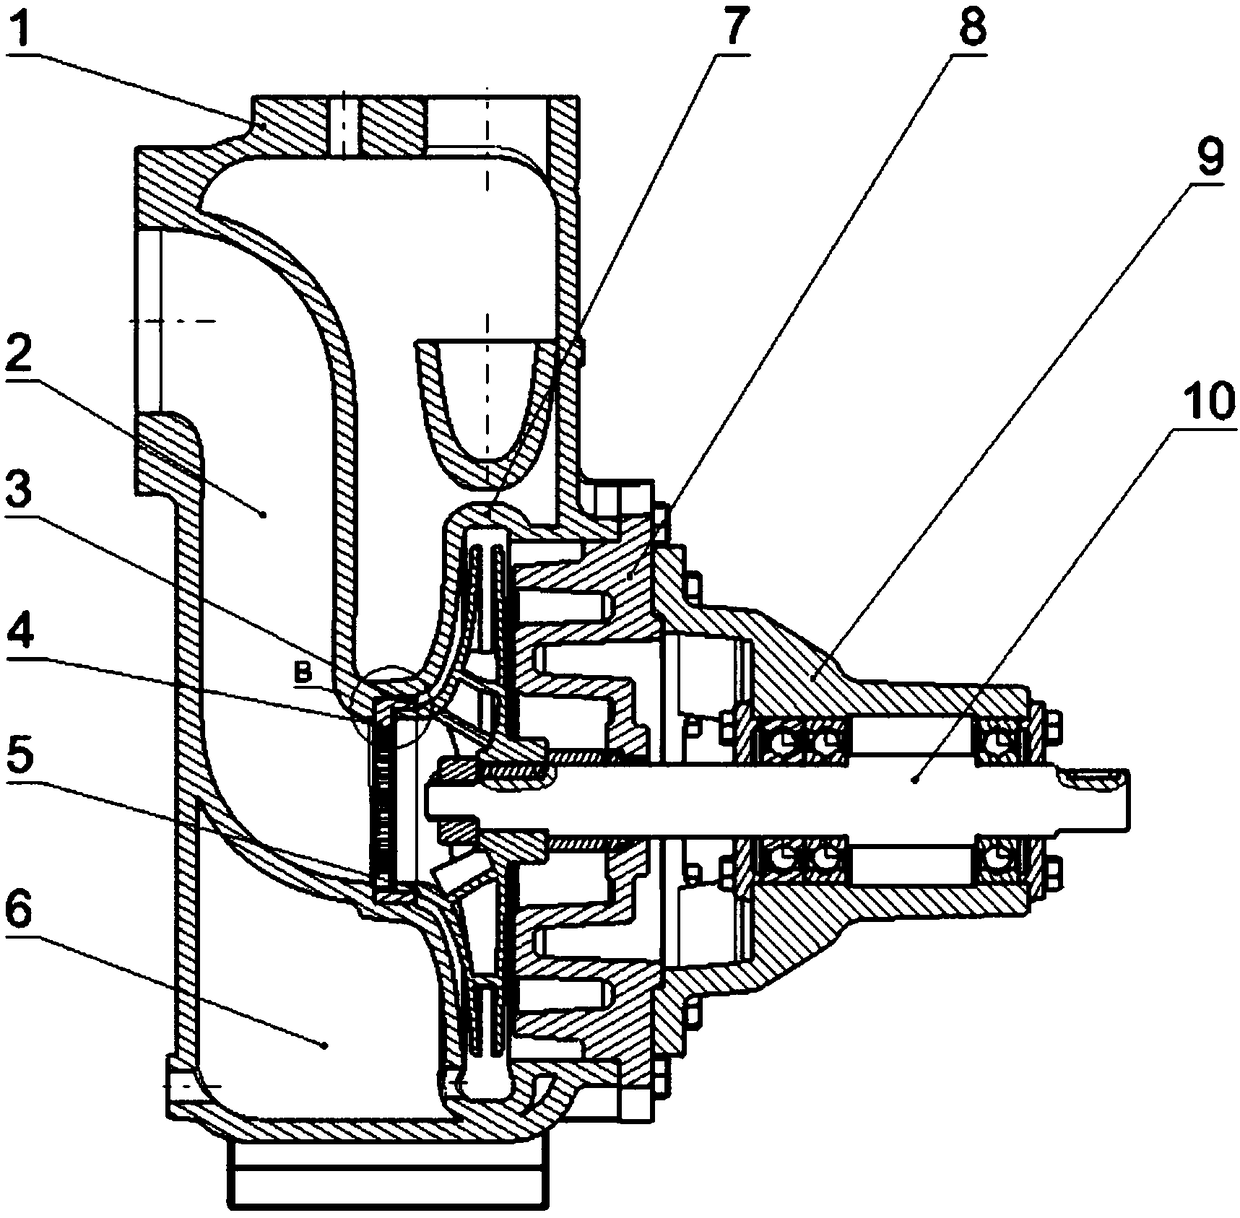 Self-priming centrifugal pump with high cavitation resistance